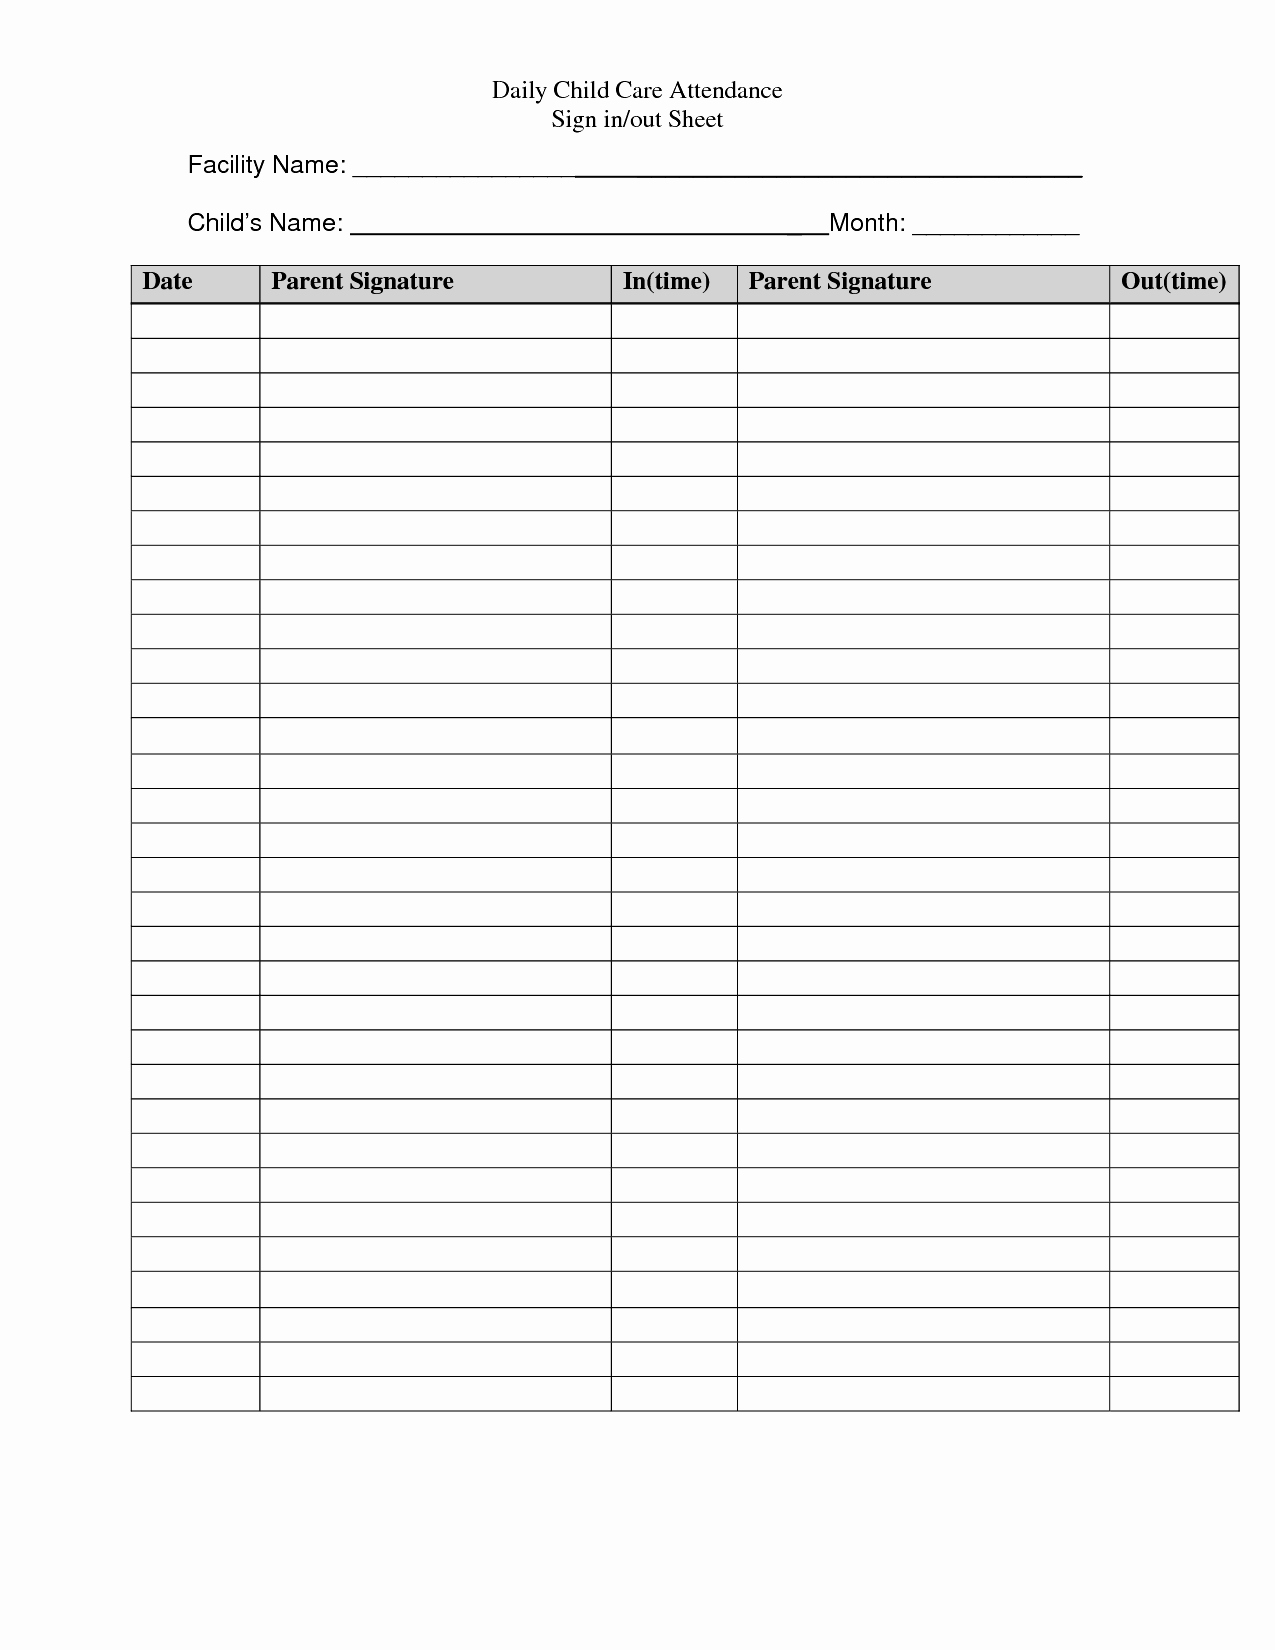 Daily Sign In Sheet Template Best Of attendance Sheet Template Example Mughals